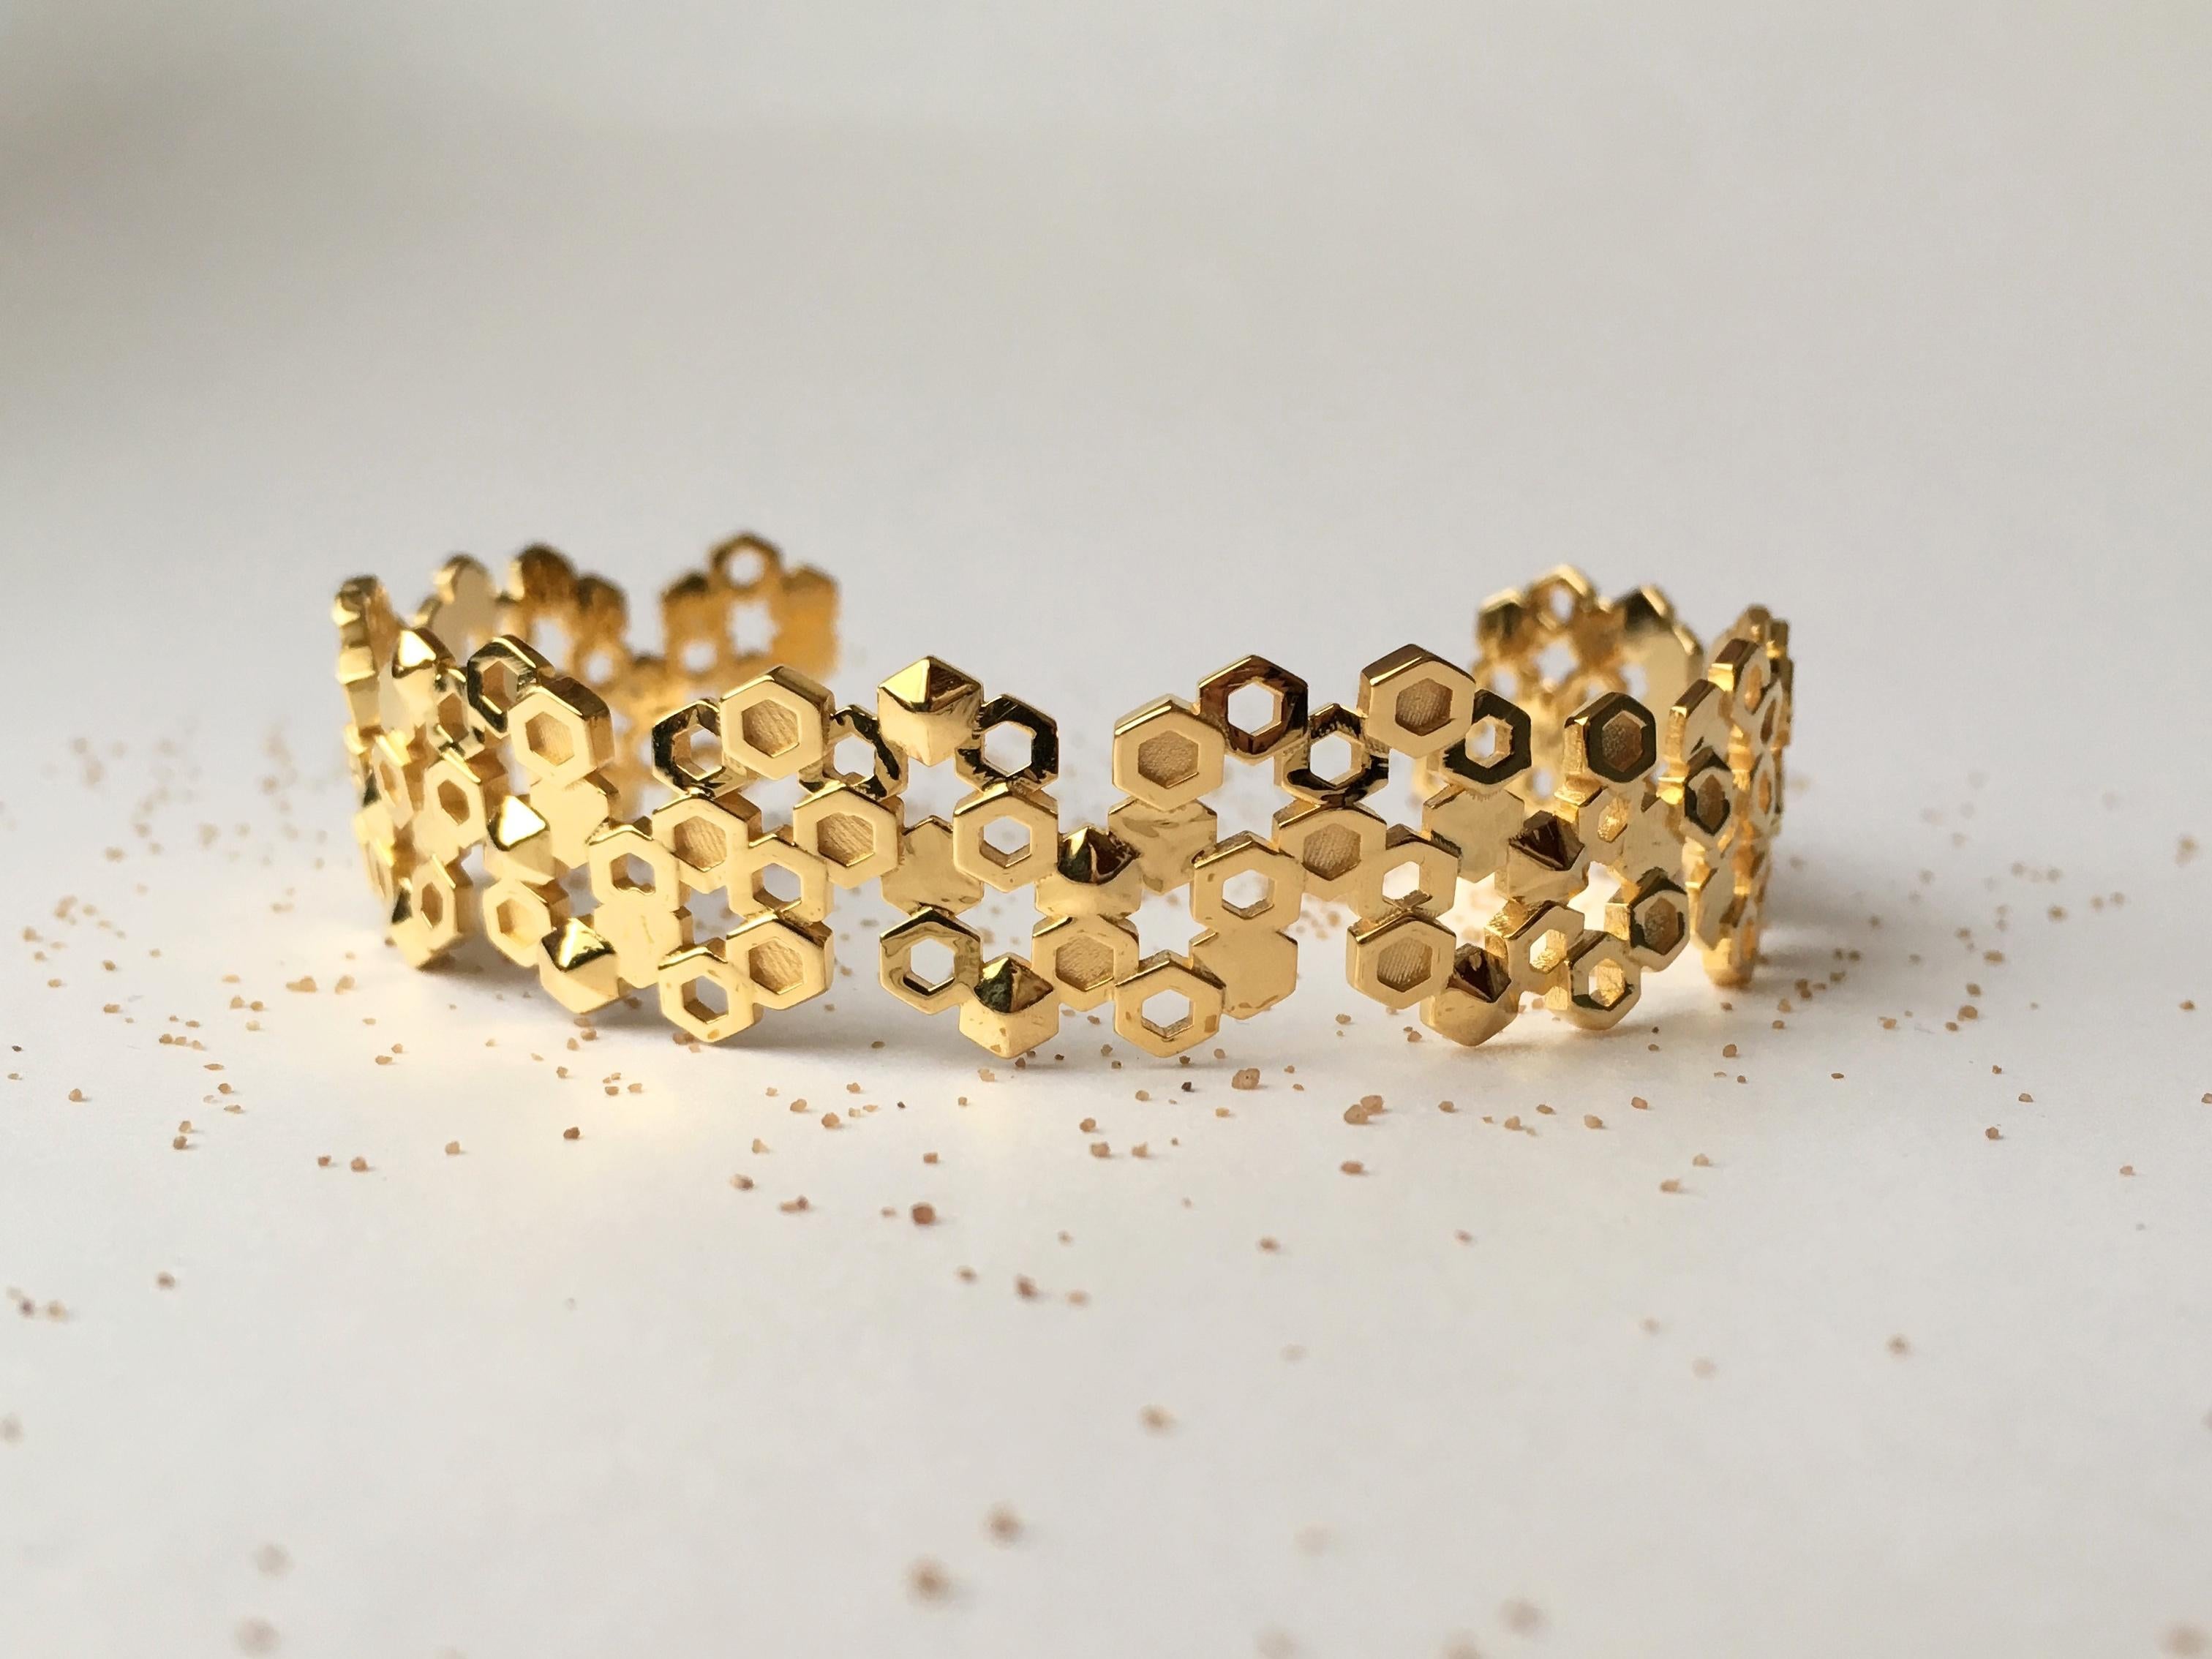 Vestiges collection cuff :Made on order in 18k yellow gold within 4 weeks in France and Belgium. 

With 